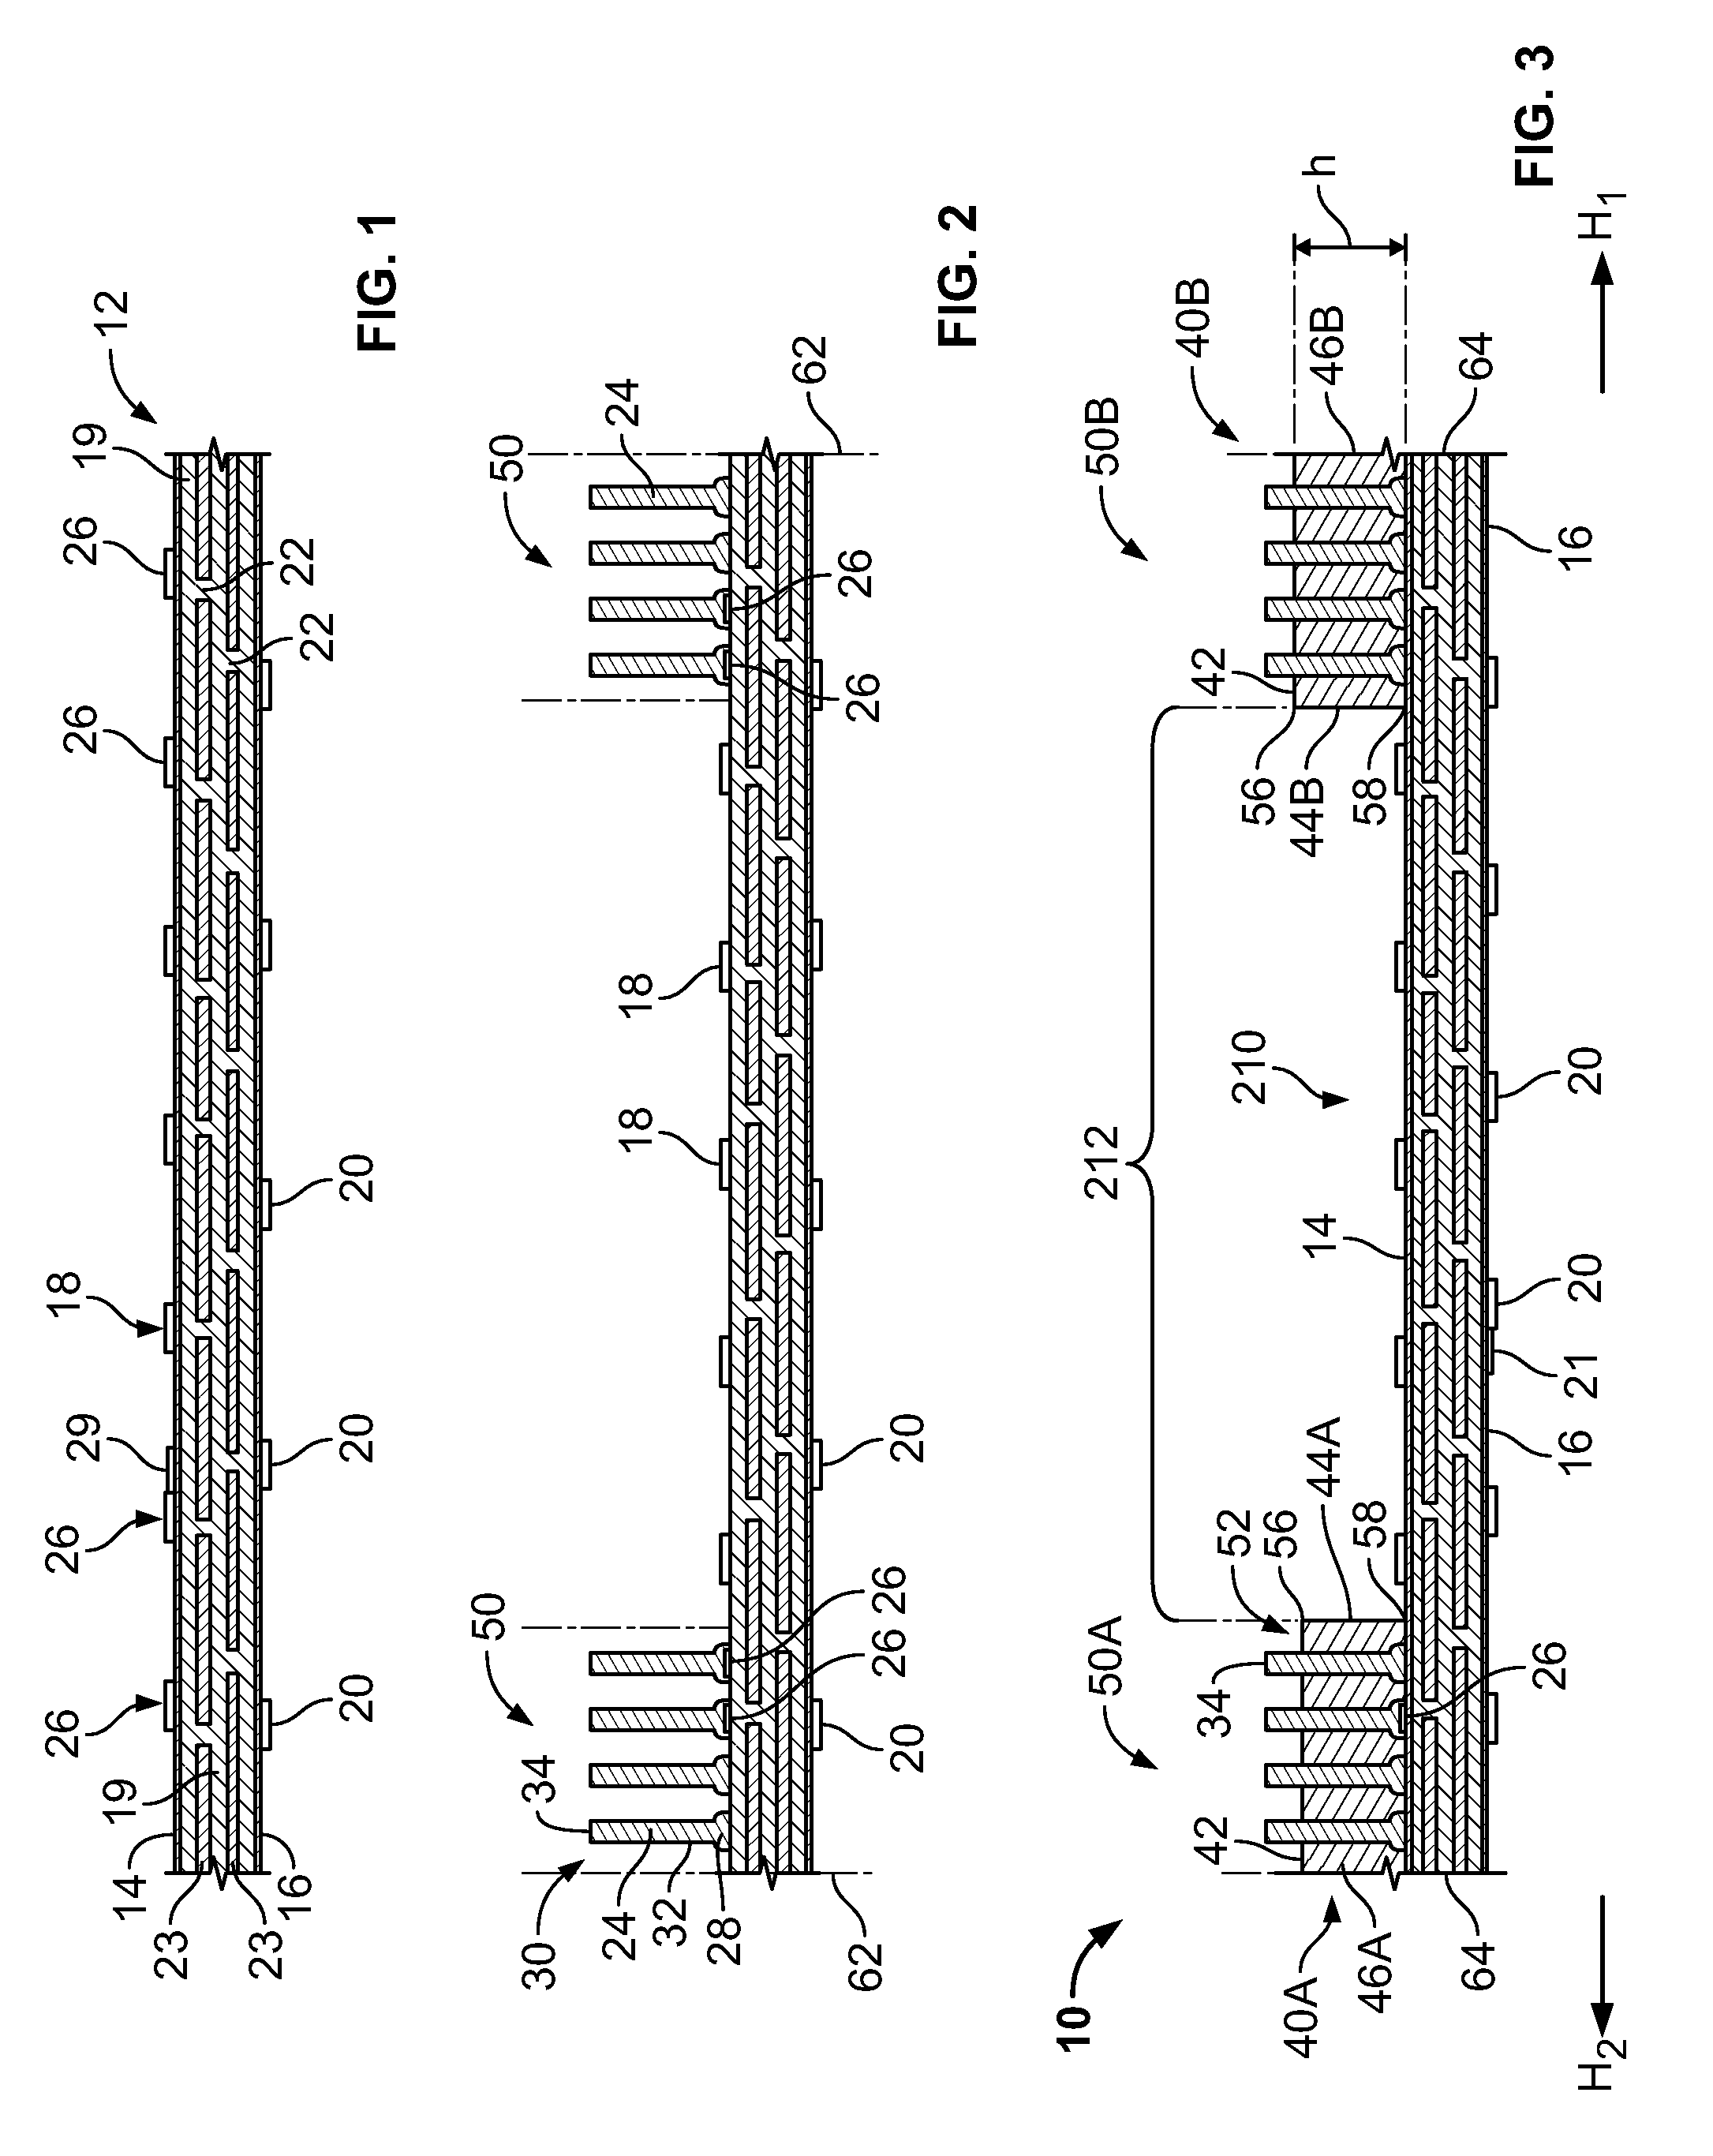 Structure for microelectronic packaging with bond elements to encapsulation surface